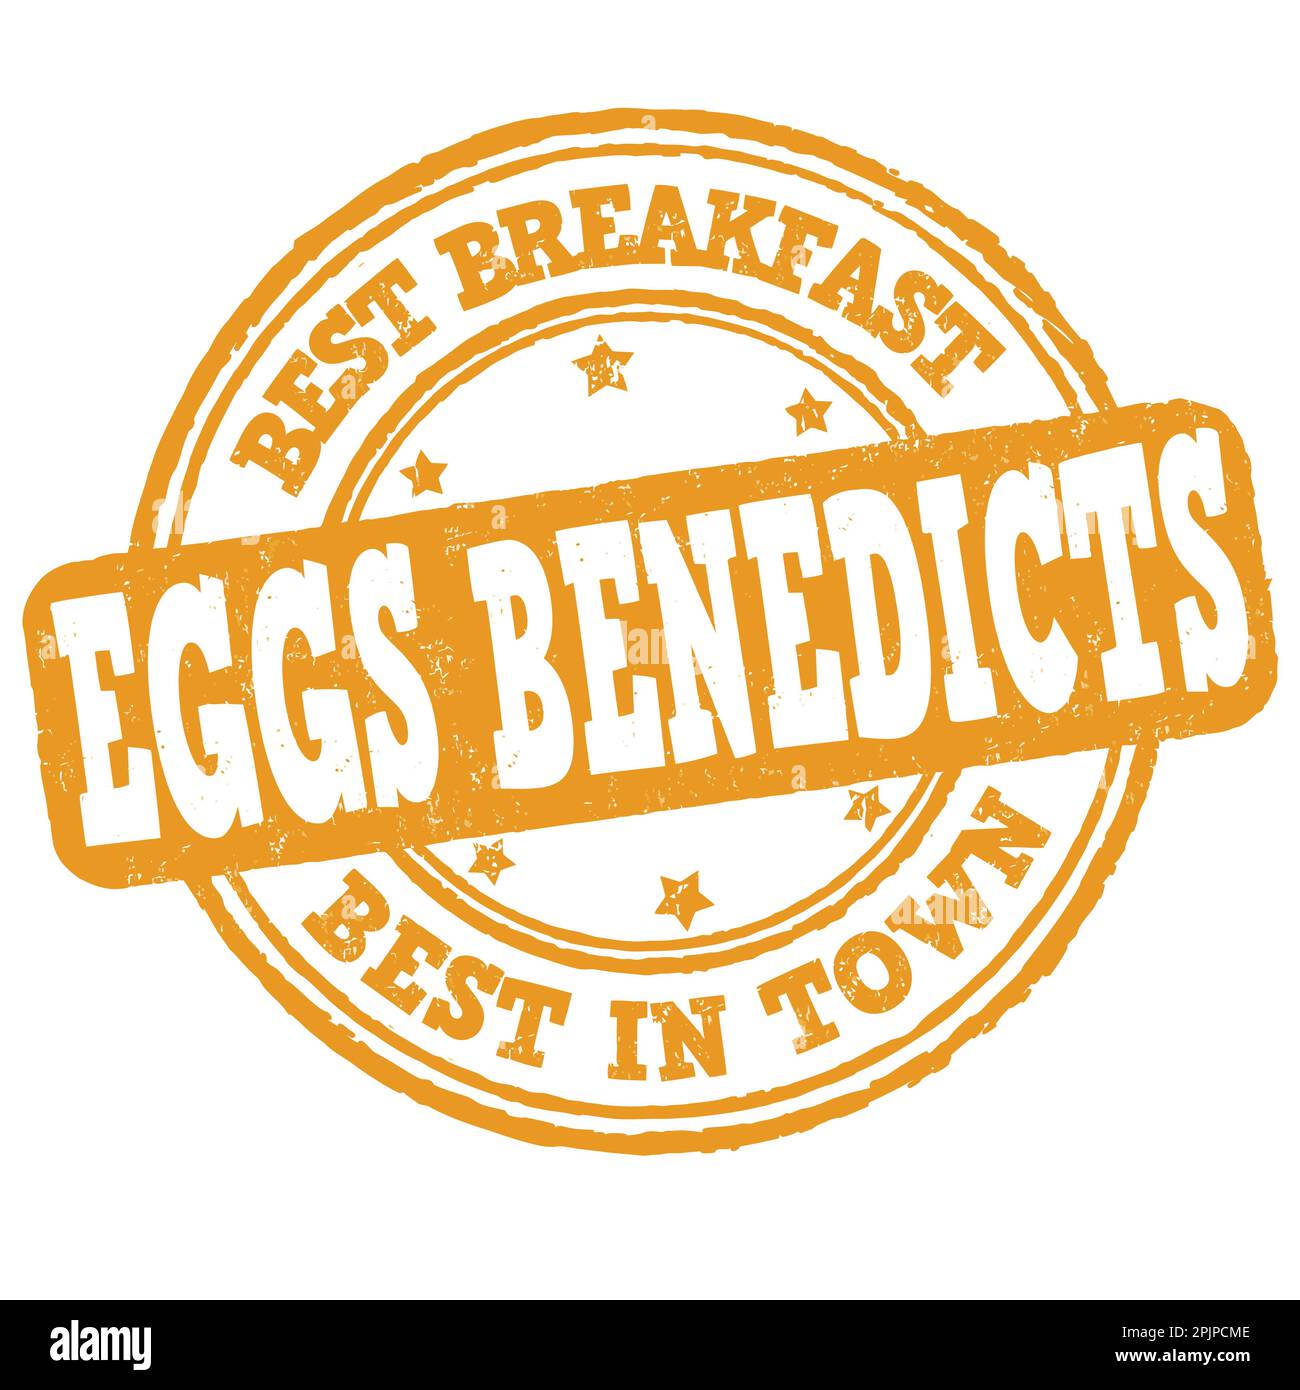 Eggs Benedicts grunge rubber stamp on white background, vector illustration Stock Vector